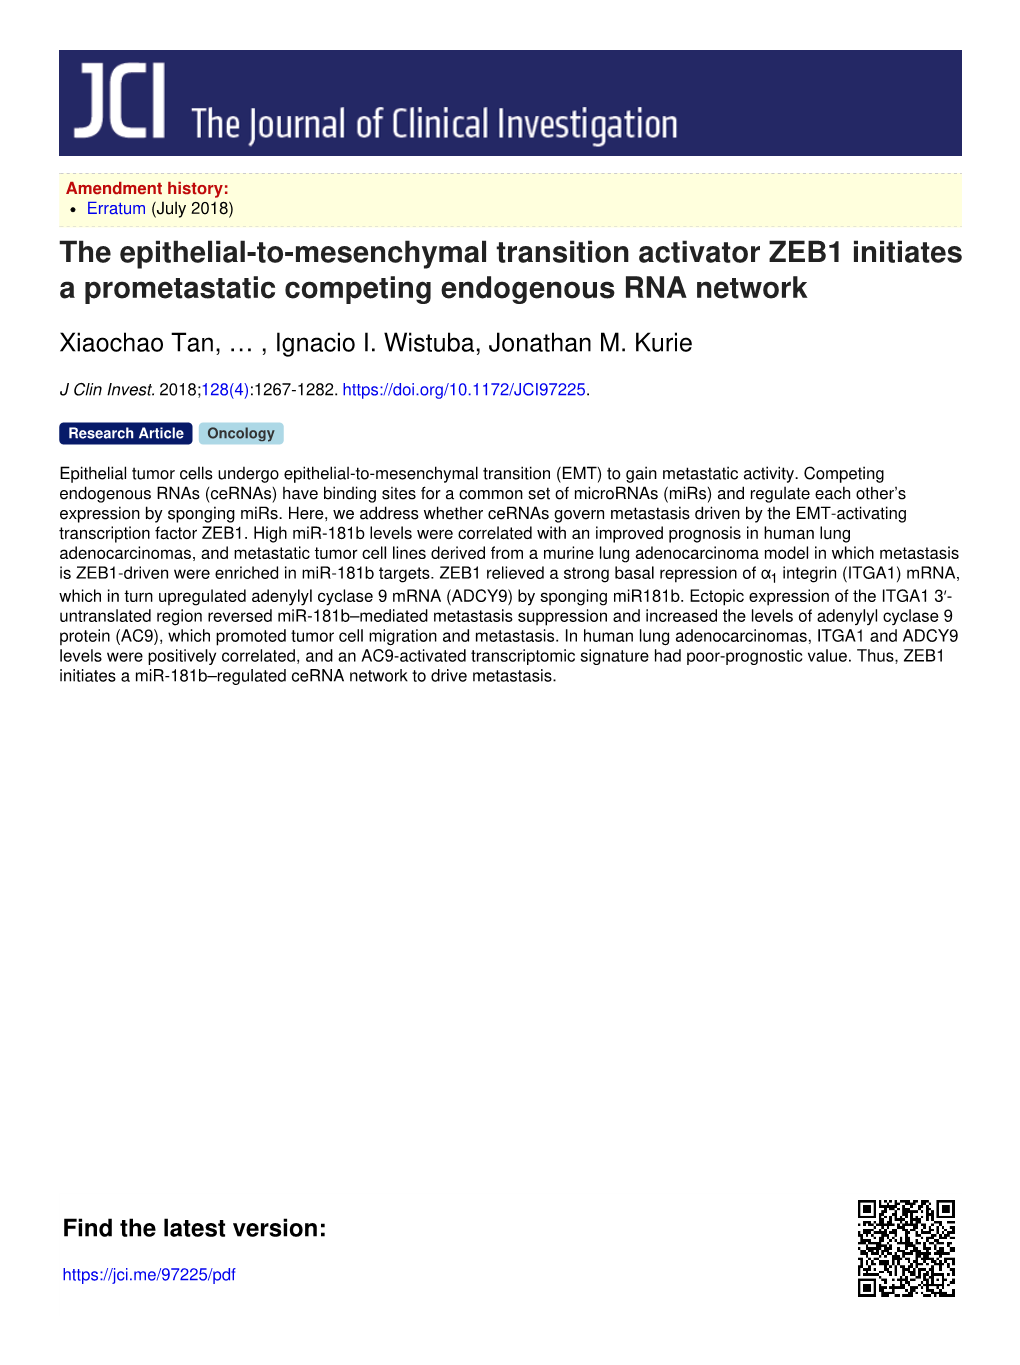 The Epithelial-To-Mesenchymal Transition Activator ZEB1 Initiates a Prometastatic Competing Endogenous RNA Network